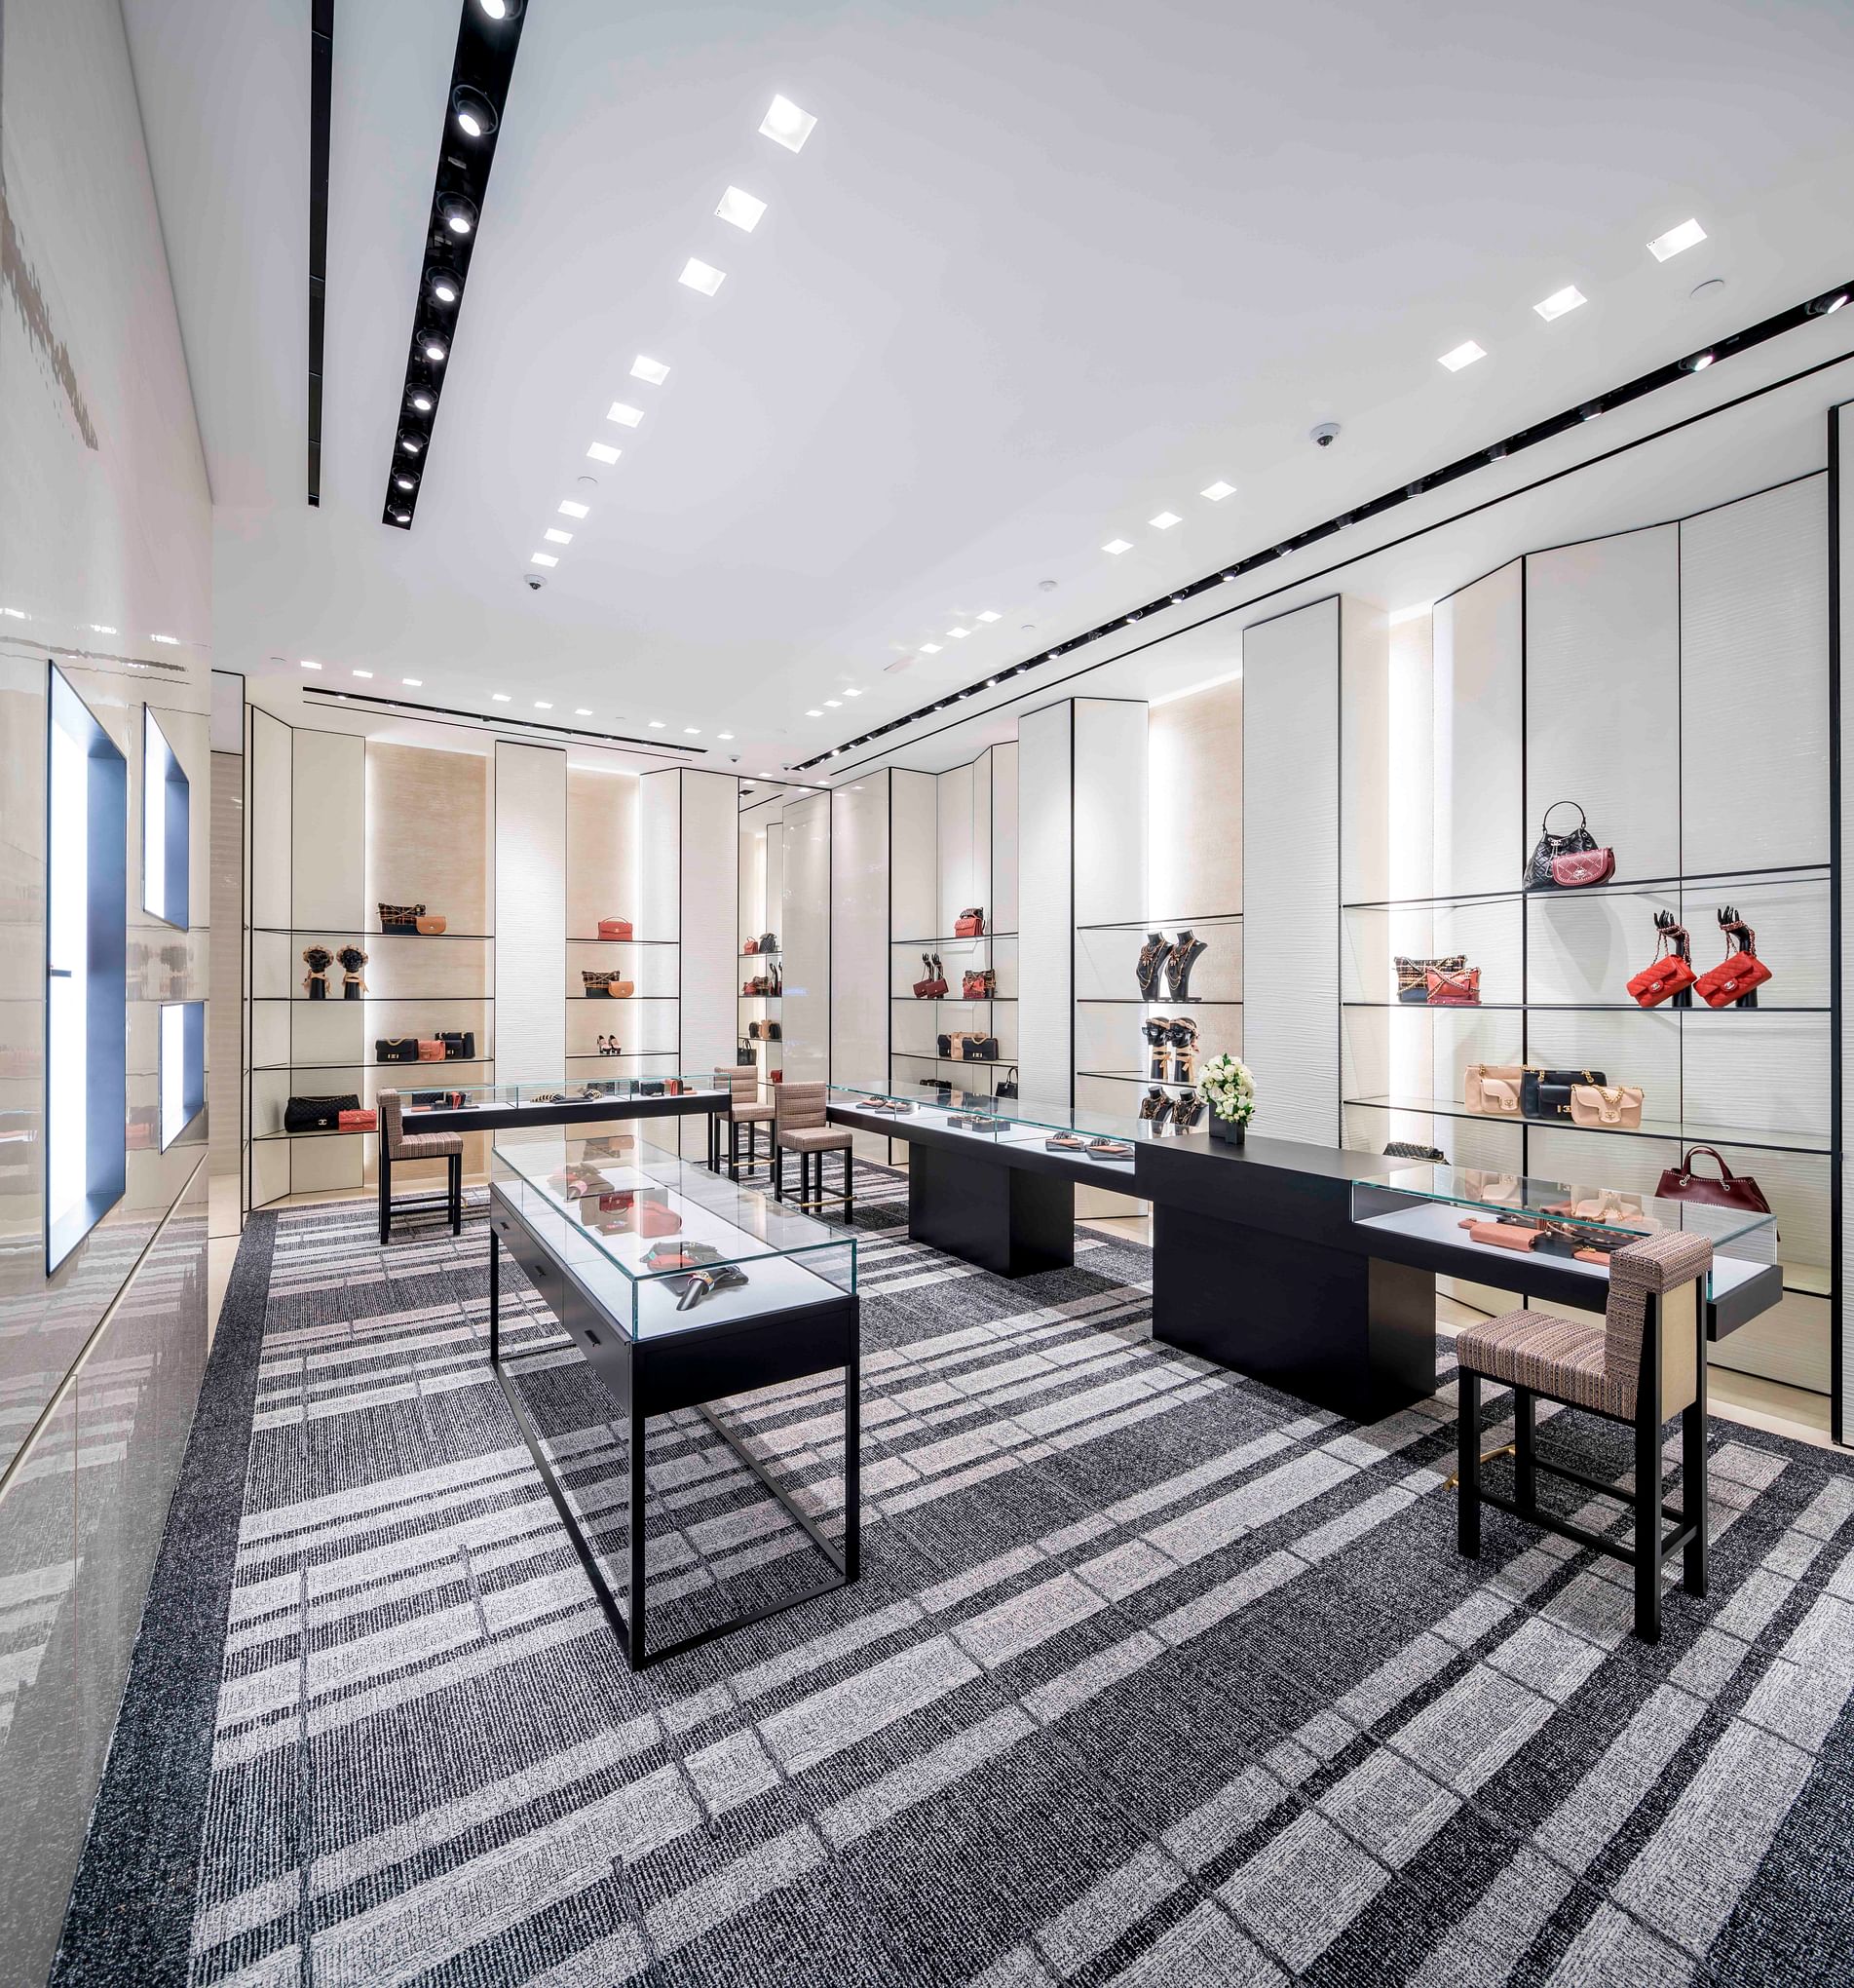 Have a peek into Southeast Asia's largest Chanel boutique located